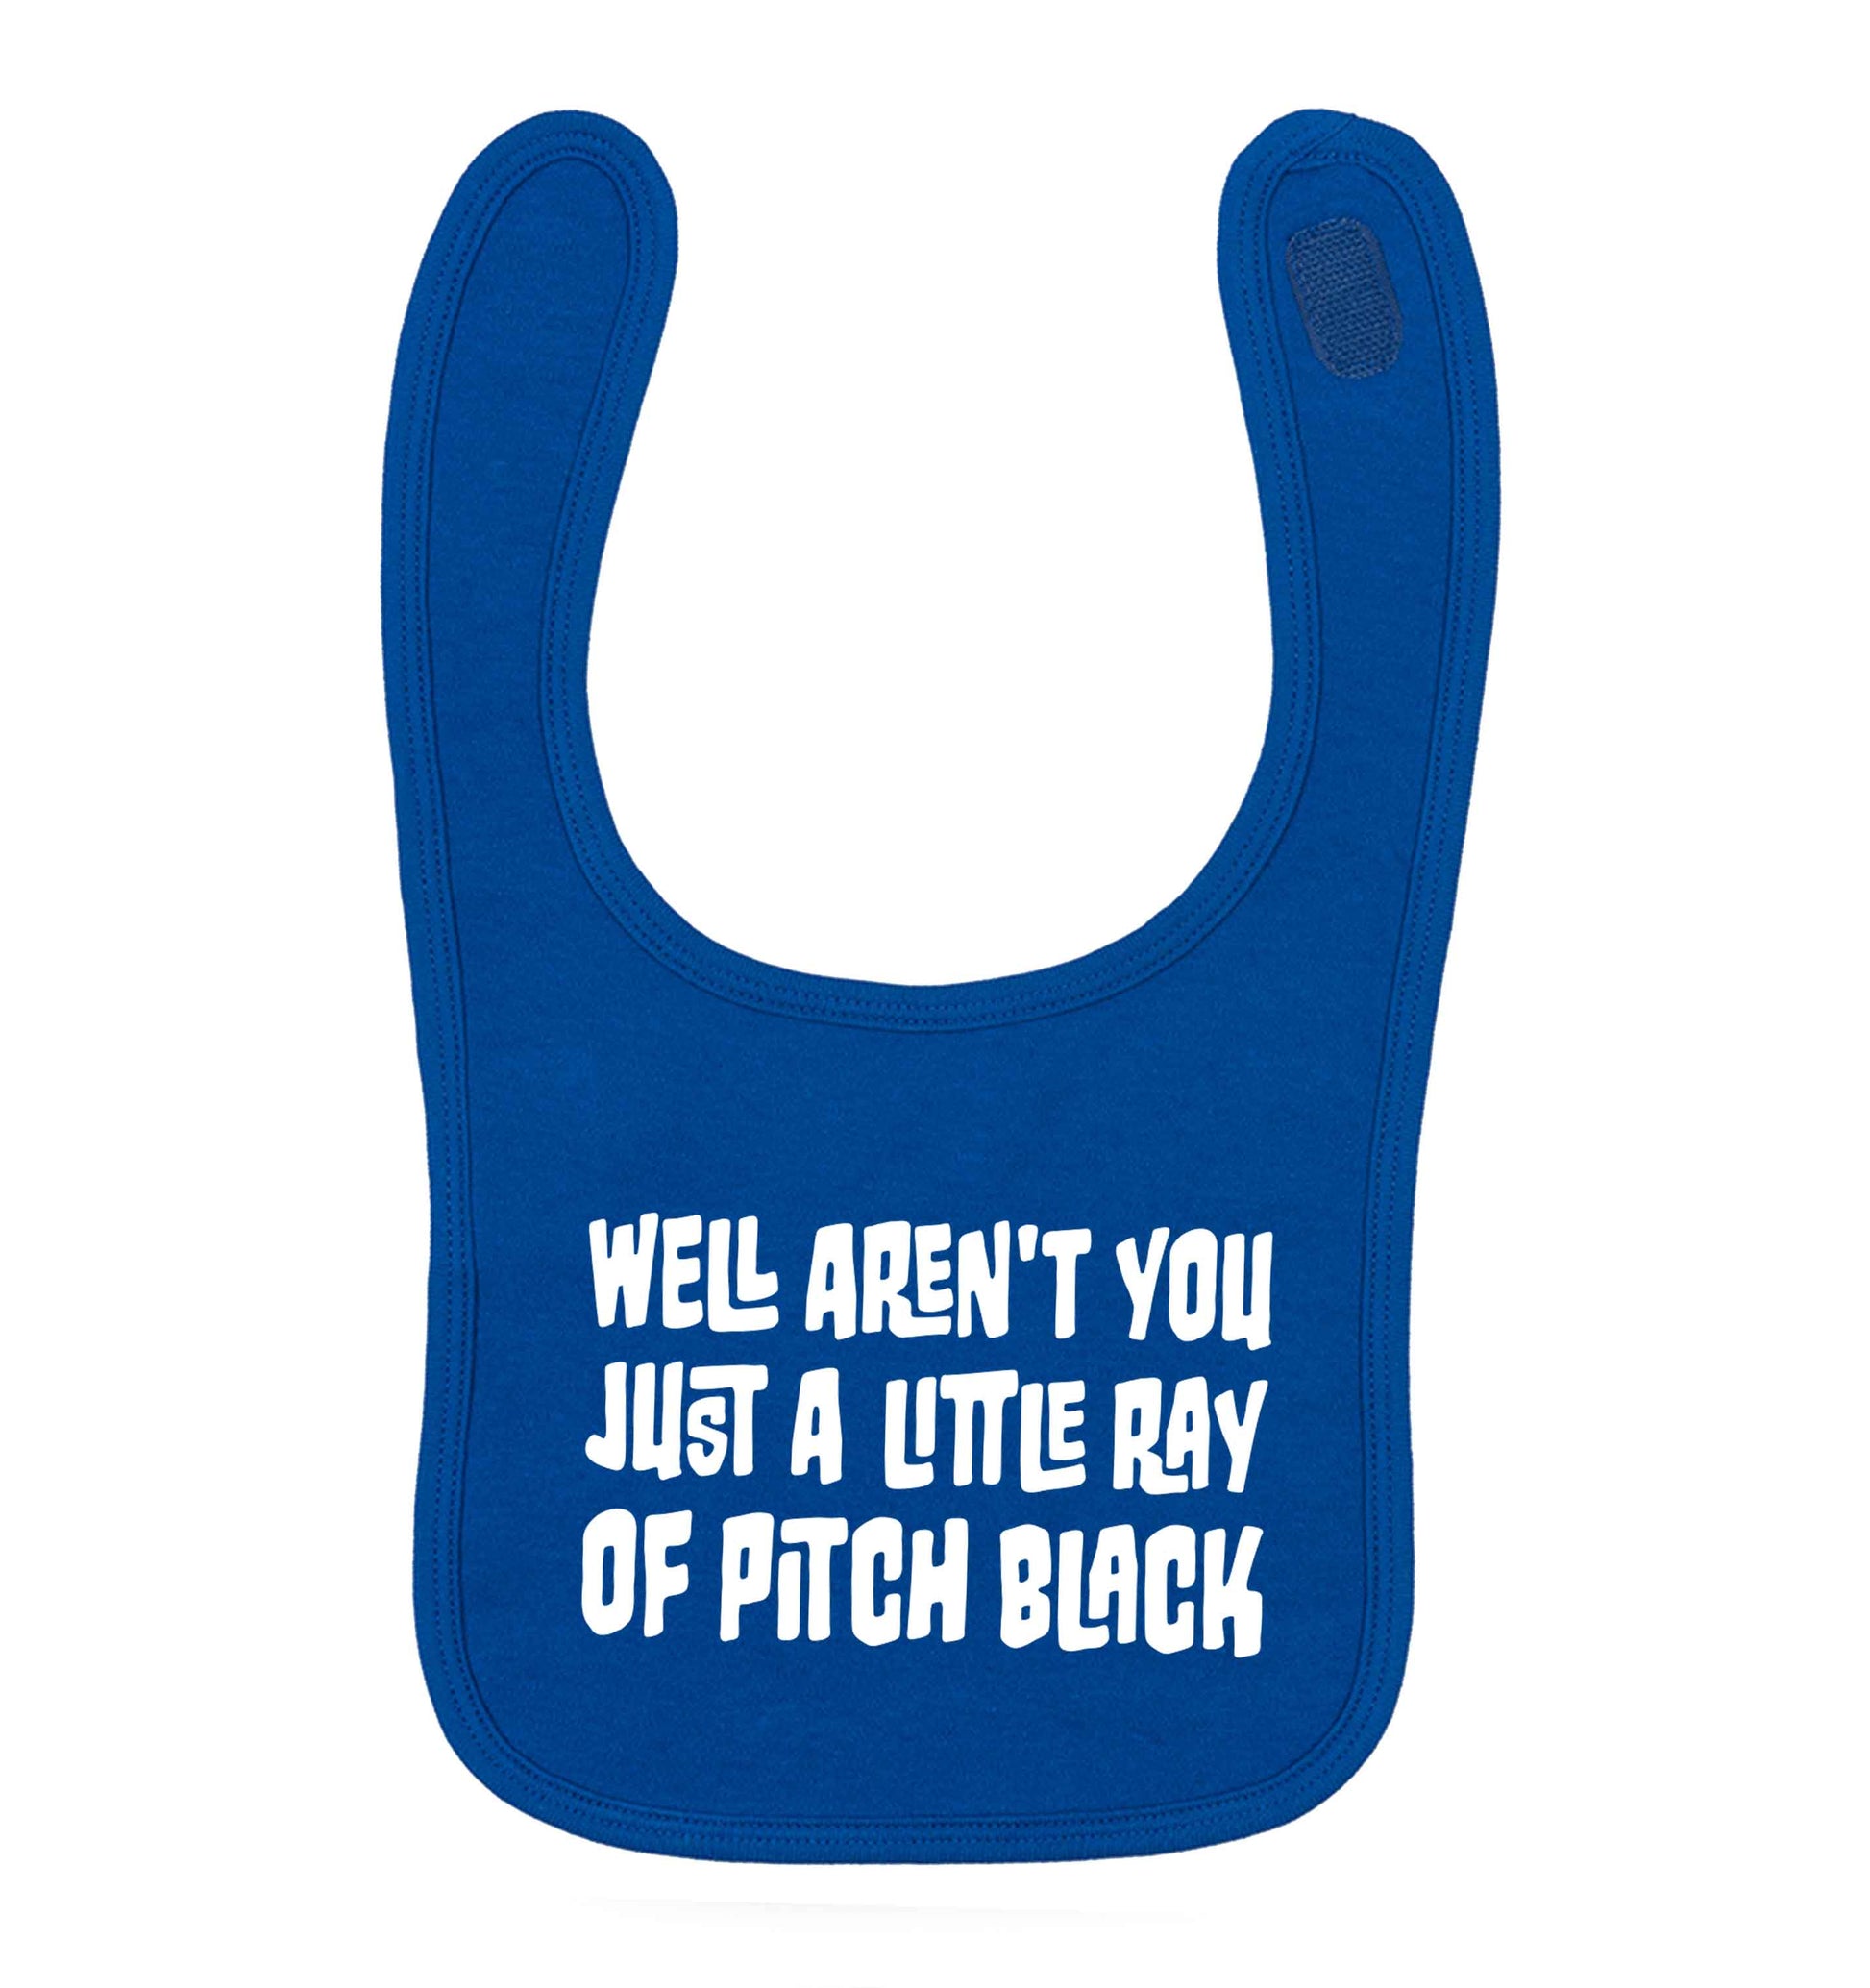 Well aren't you just a little ray of pitch black Kit royal blue baby bib